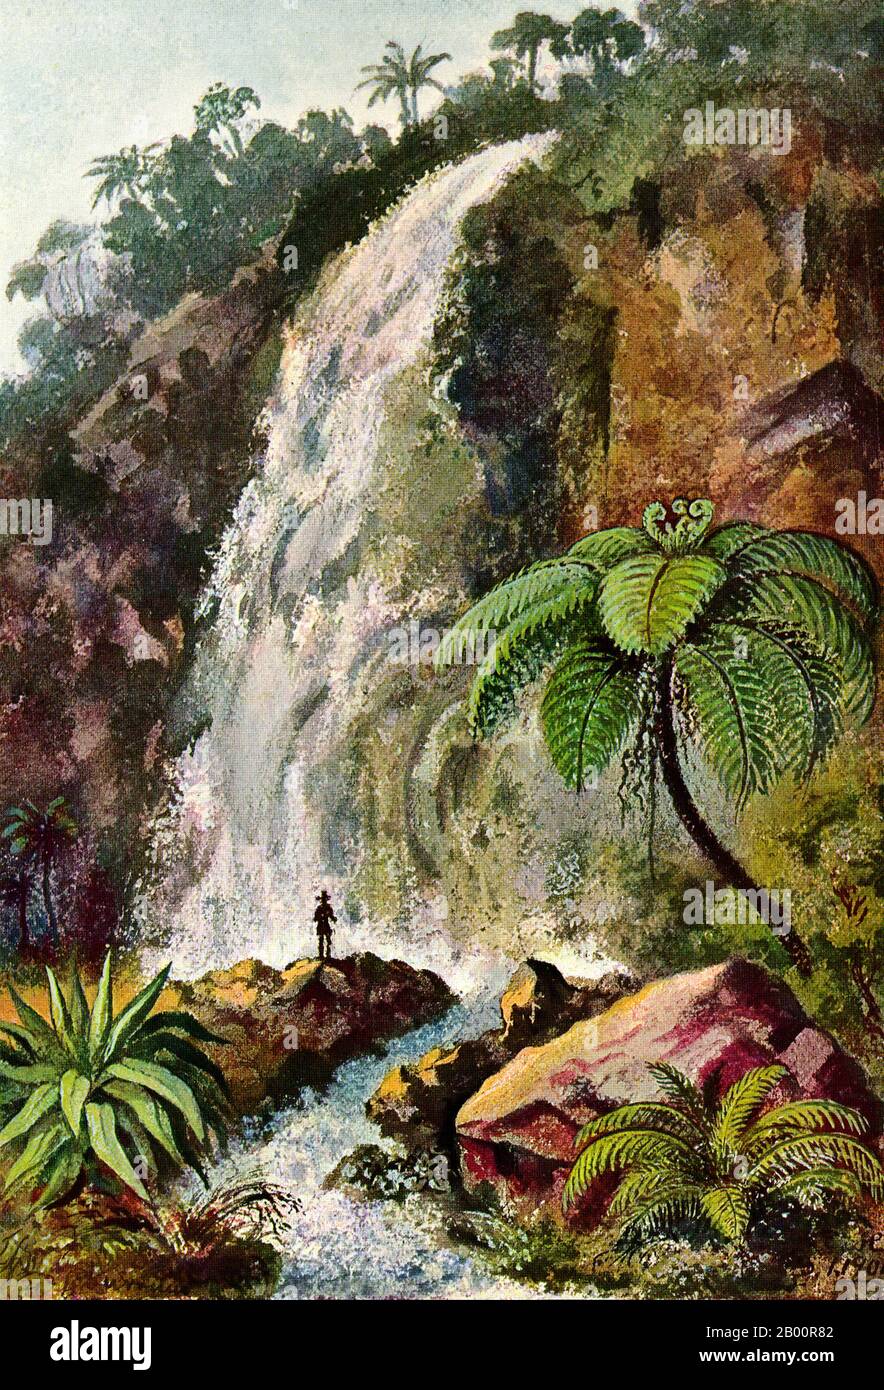 Indonesia/Germany: 'A waterfall on a volcano side in Java'. Watercolour painting by the German scientist and traveller Ernst Haeckel (1834-1919), c. 1901.  Ernst Heinrich Philipp August Haeckel (February 16, 1834 – August 9, 1919), also written von Haeckel, was an eminent German biologist, naturalist, philosopher, physician, professor and artist who discovered, described and named thousands of new species, mapped a genealogical tree relating all life forms, and coined many terms in biology, including anthropogeny, ecology, phylum, phylogeny, and the kingdom Protista. Stock Photo